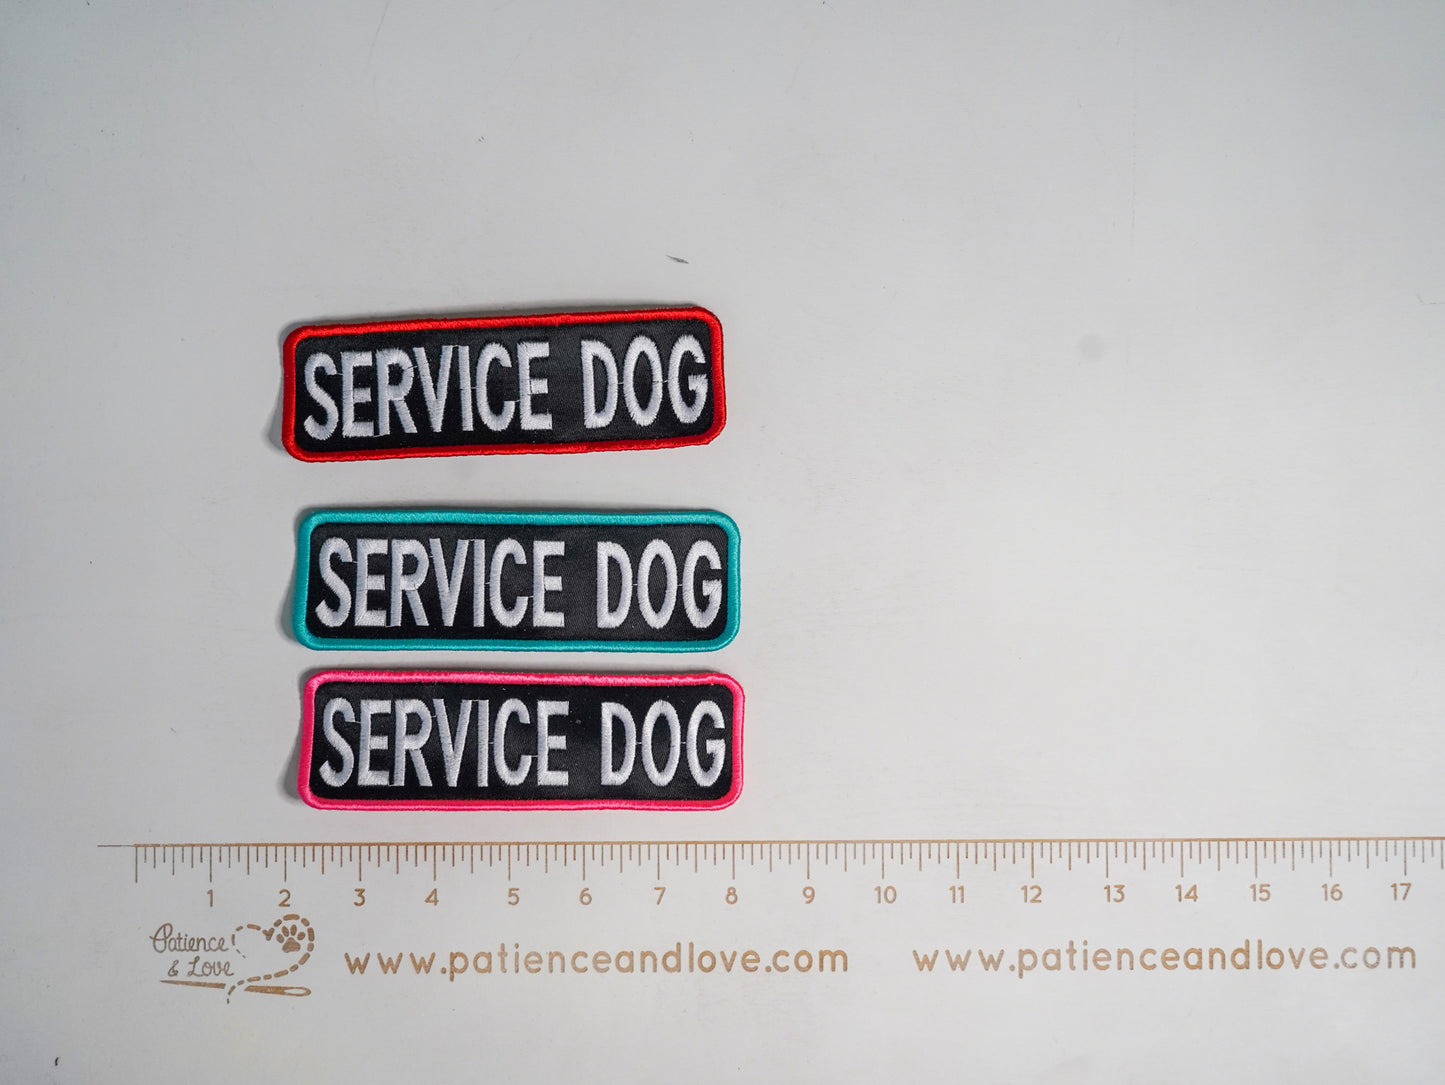 Premade/ Ready to ship patches - black fabric - Service Dog, Rectangular 6x2 patch